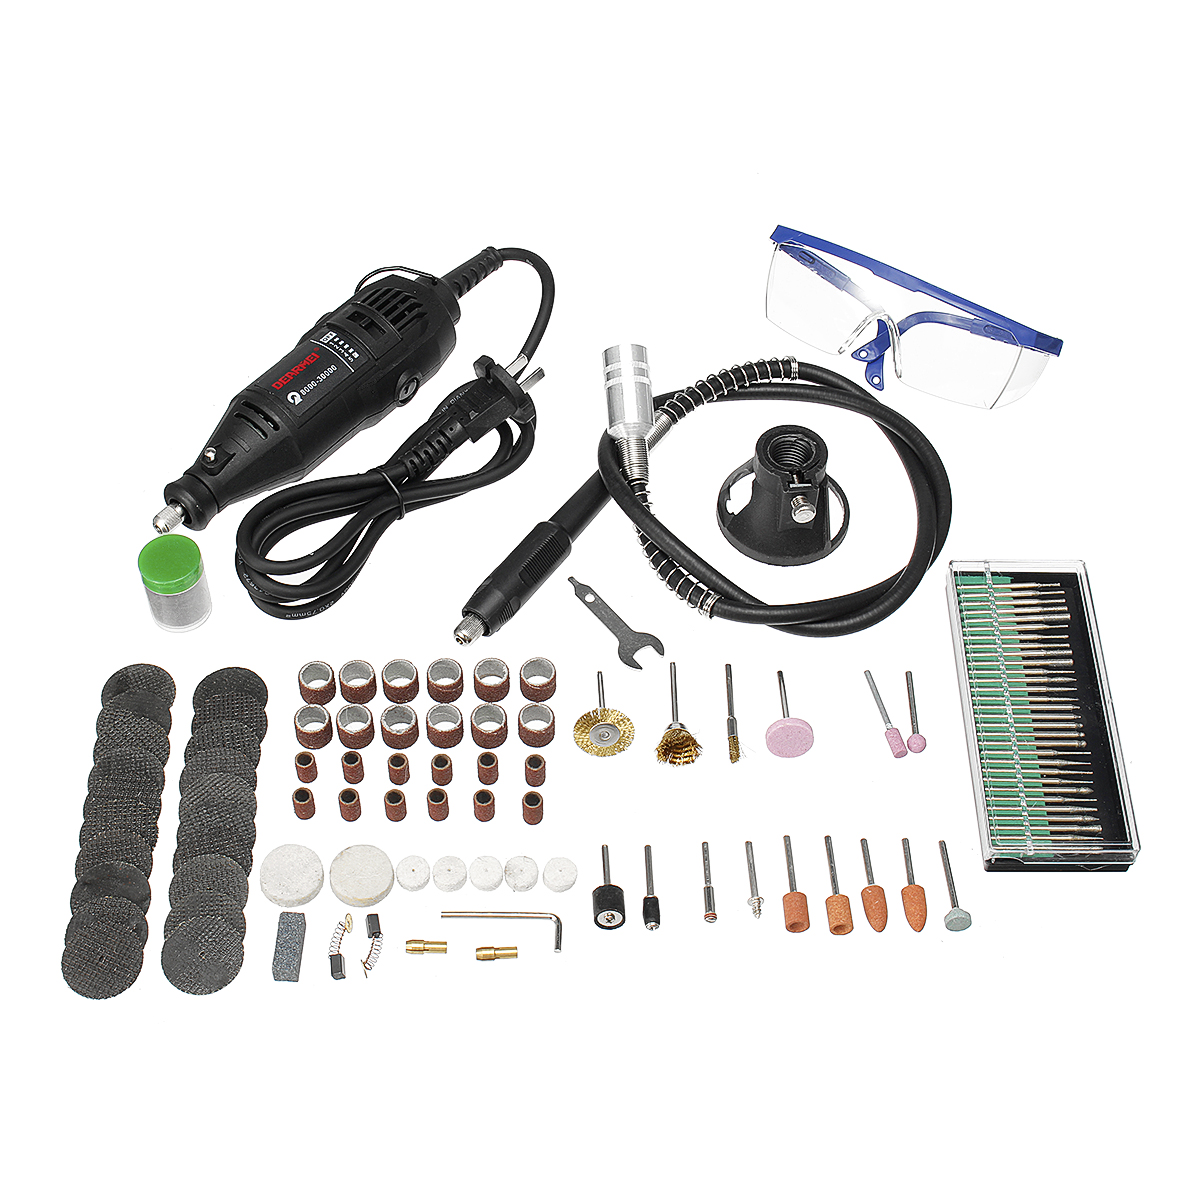 

140Pcs 5 Speed Electric Drill Engraver Mini Drill Grinder Rotary Tool Kit W/ Accessories Power Drill Pen Grinding Machine